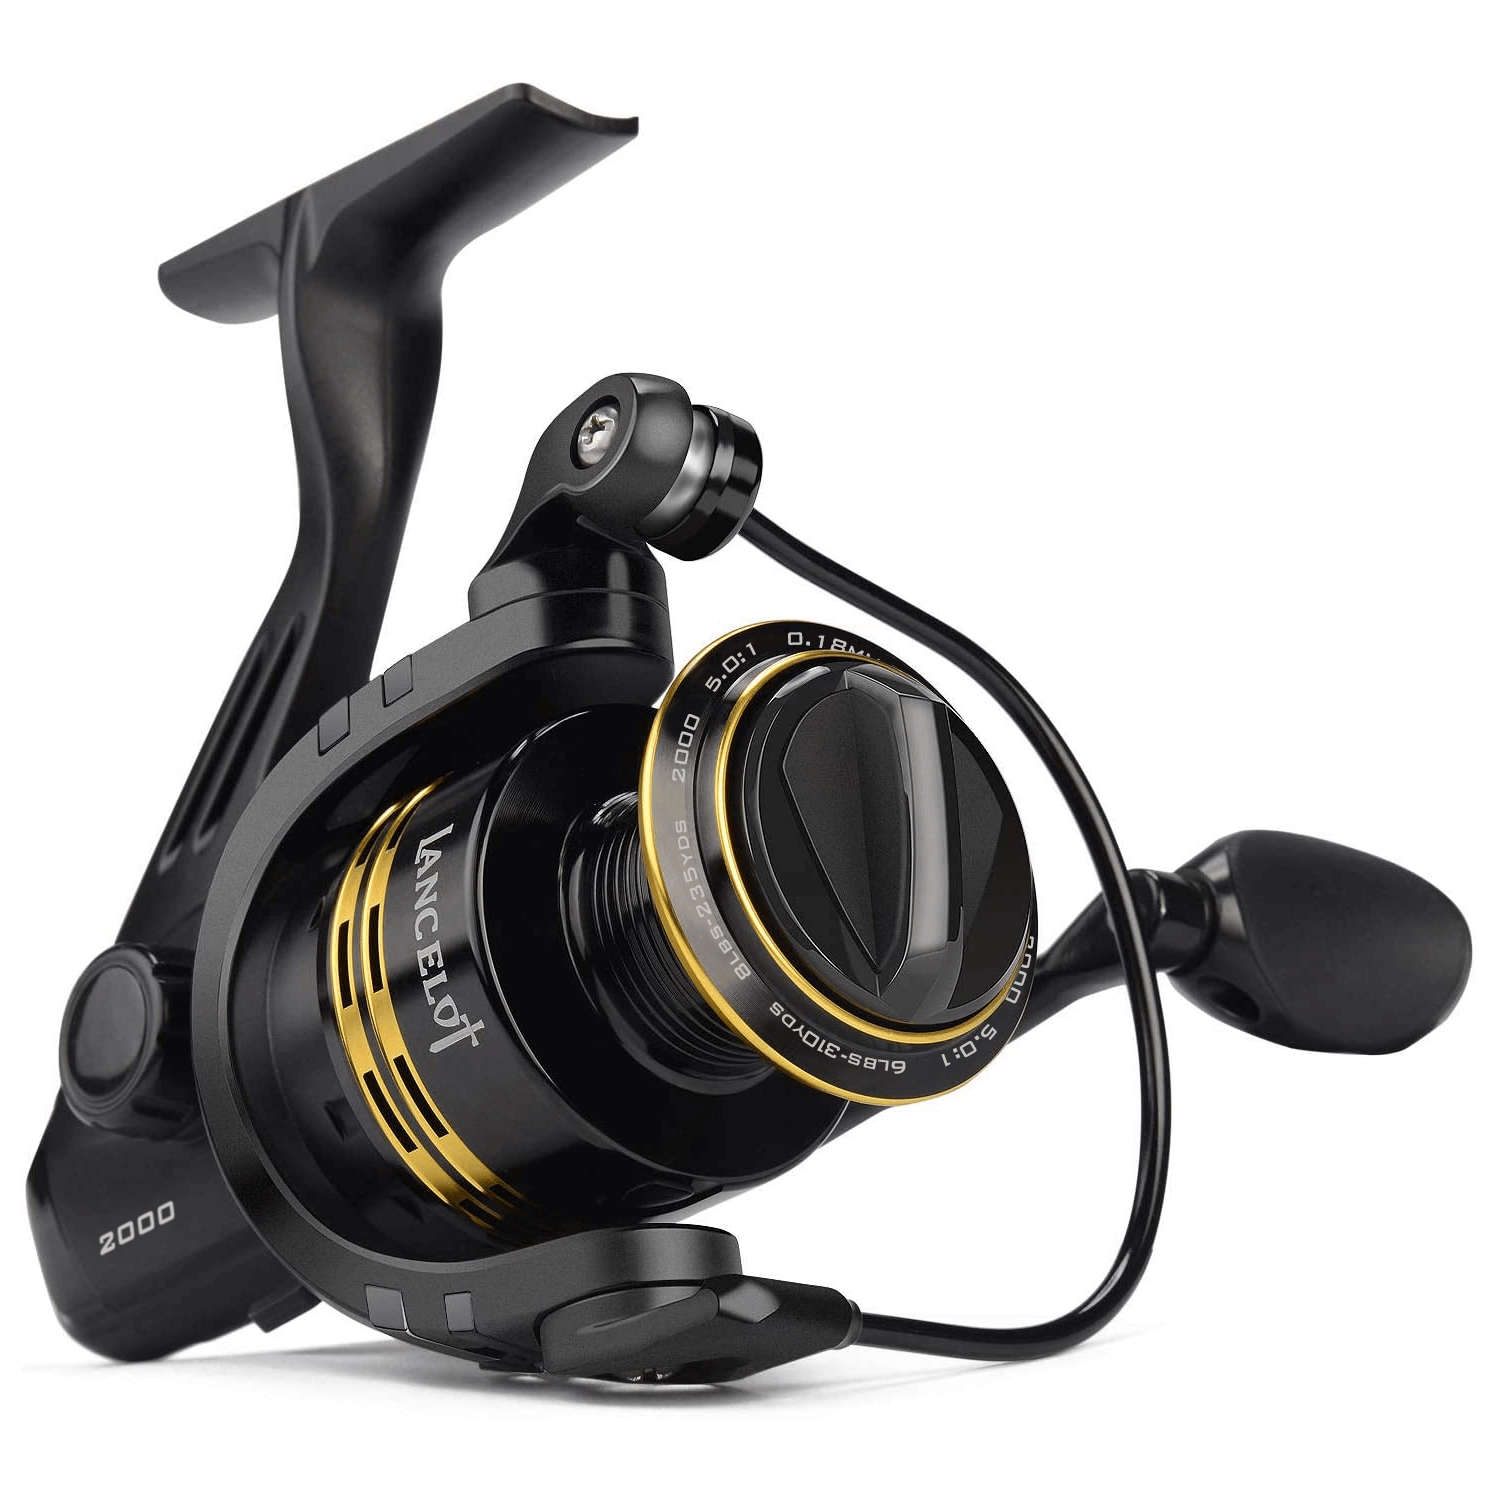 KastKing Kodiak 2000 Spinning Reel Unboxing . Is this the ultimate finesse  Reel? - Shopping - Community